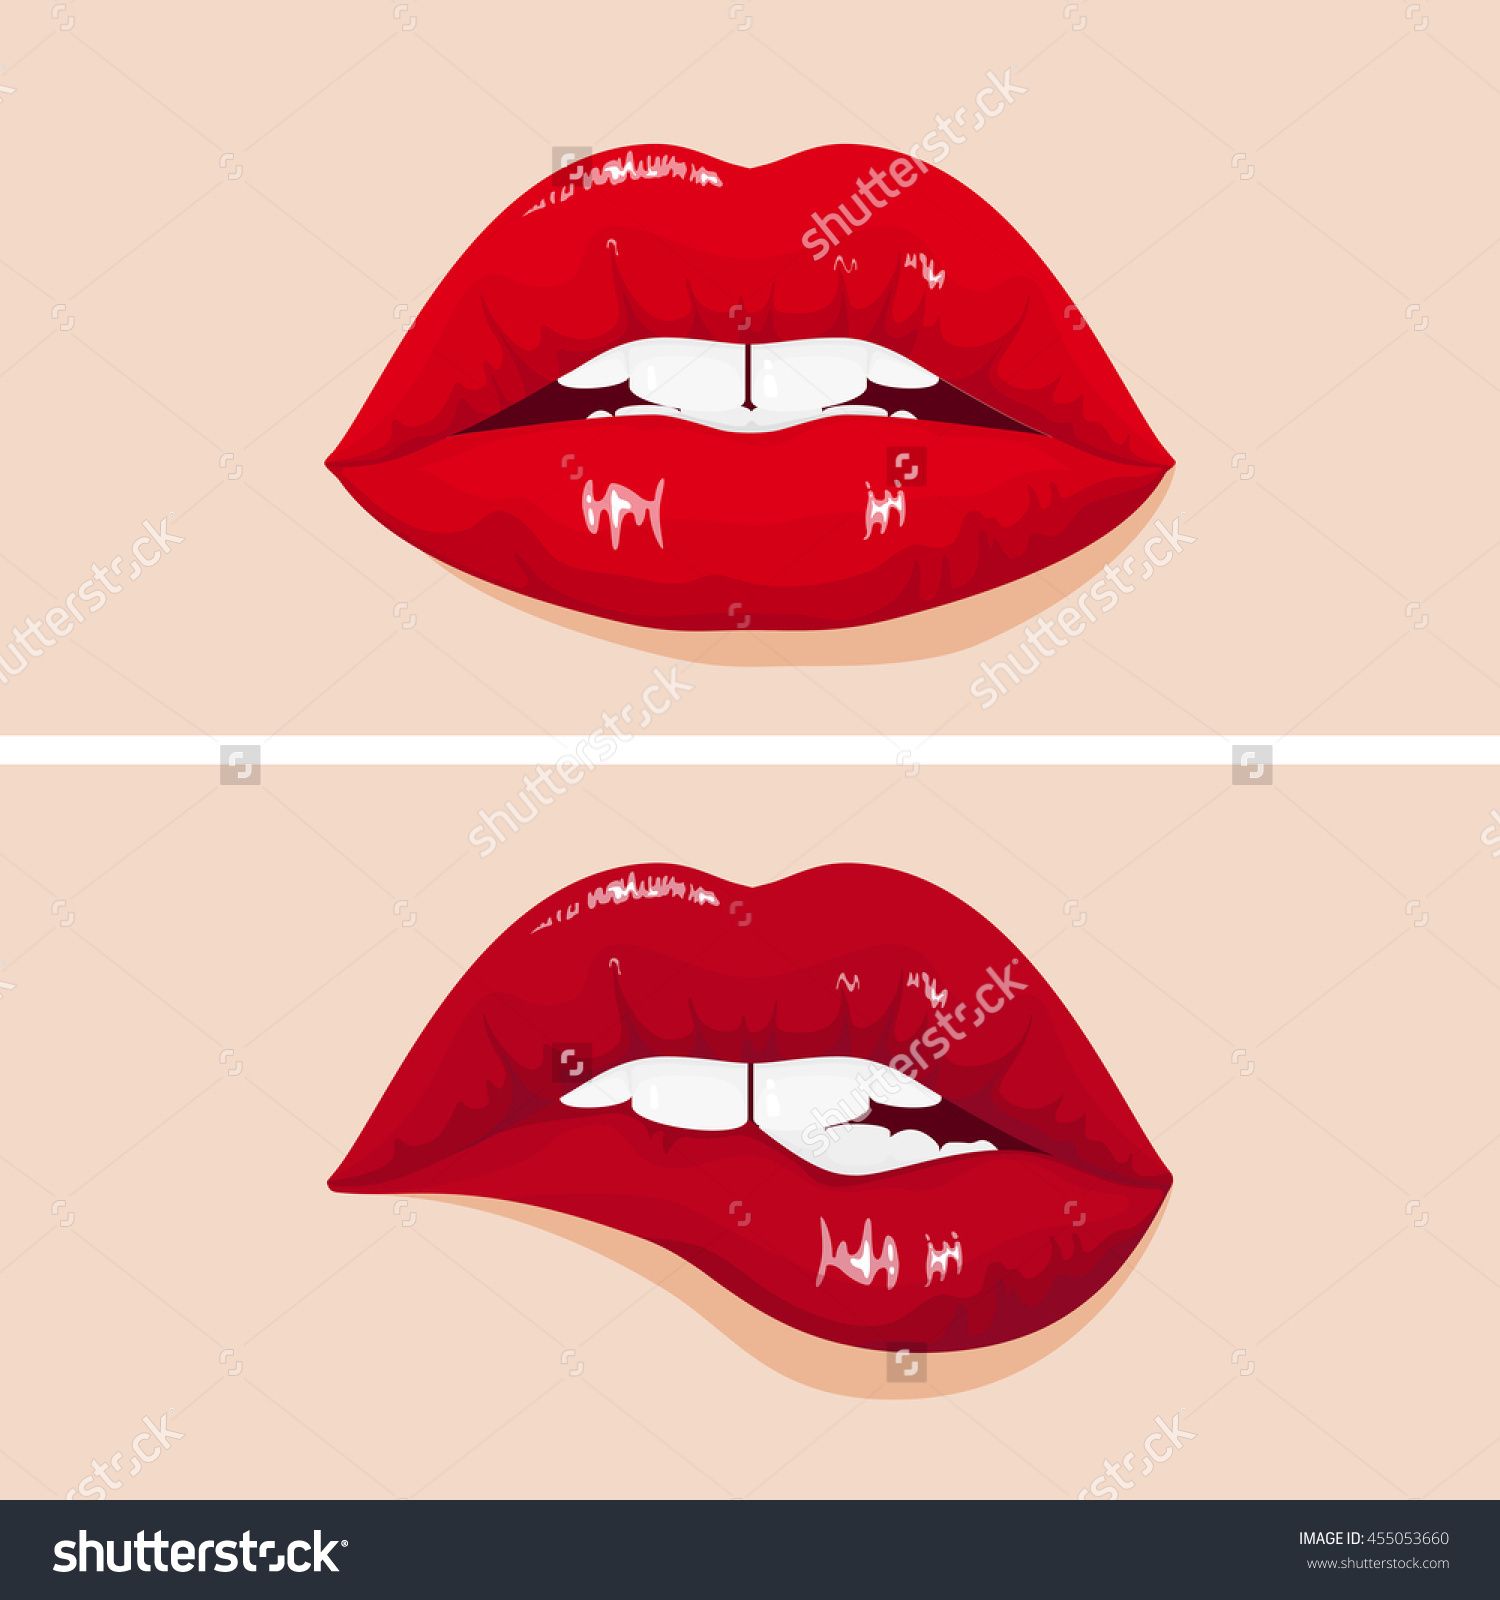 lips clipart woman's